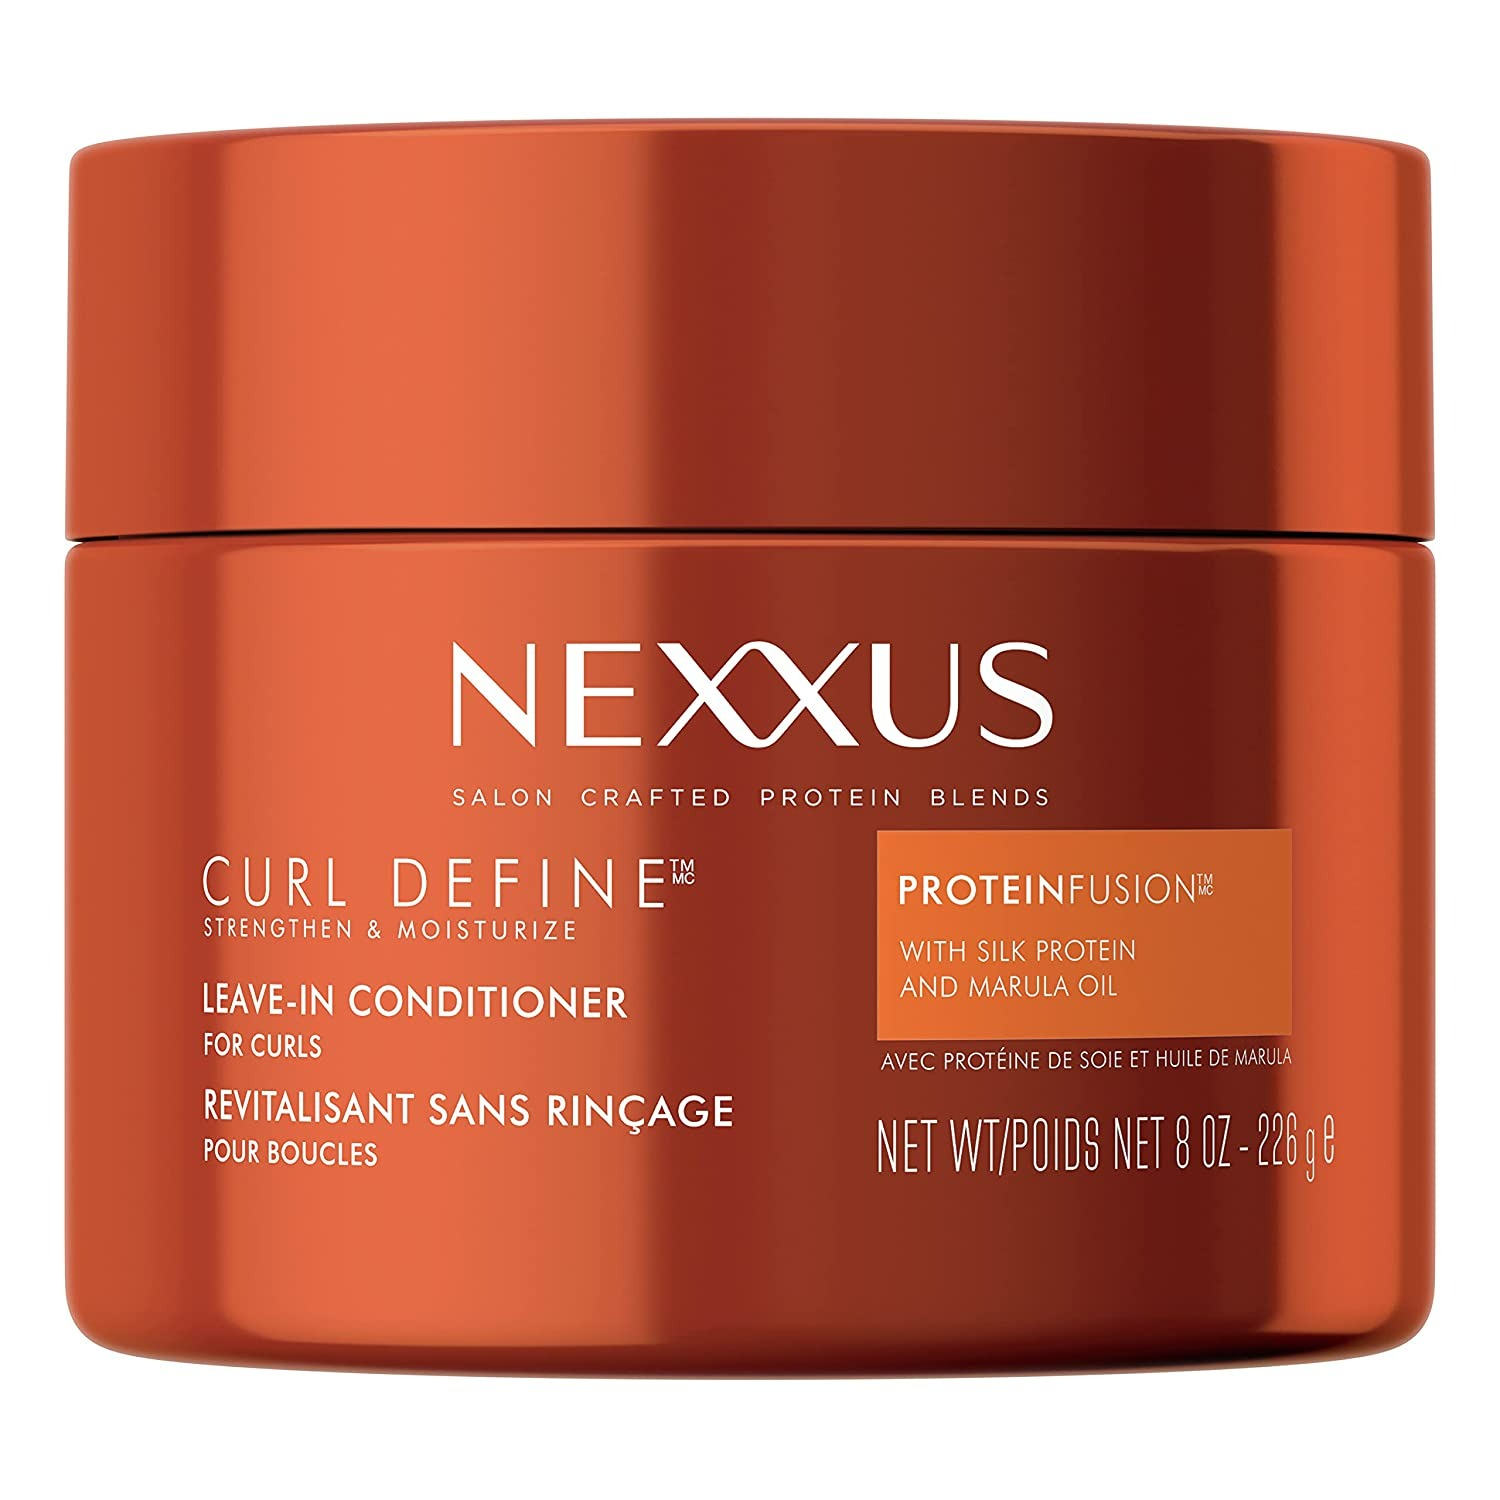 Nexxus Curl Define Leave-in Conditioner for Curly Hair - 8 Oz-0